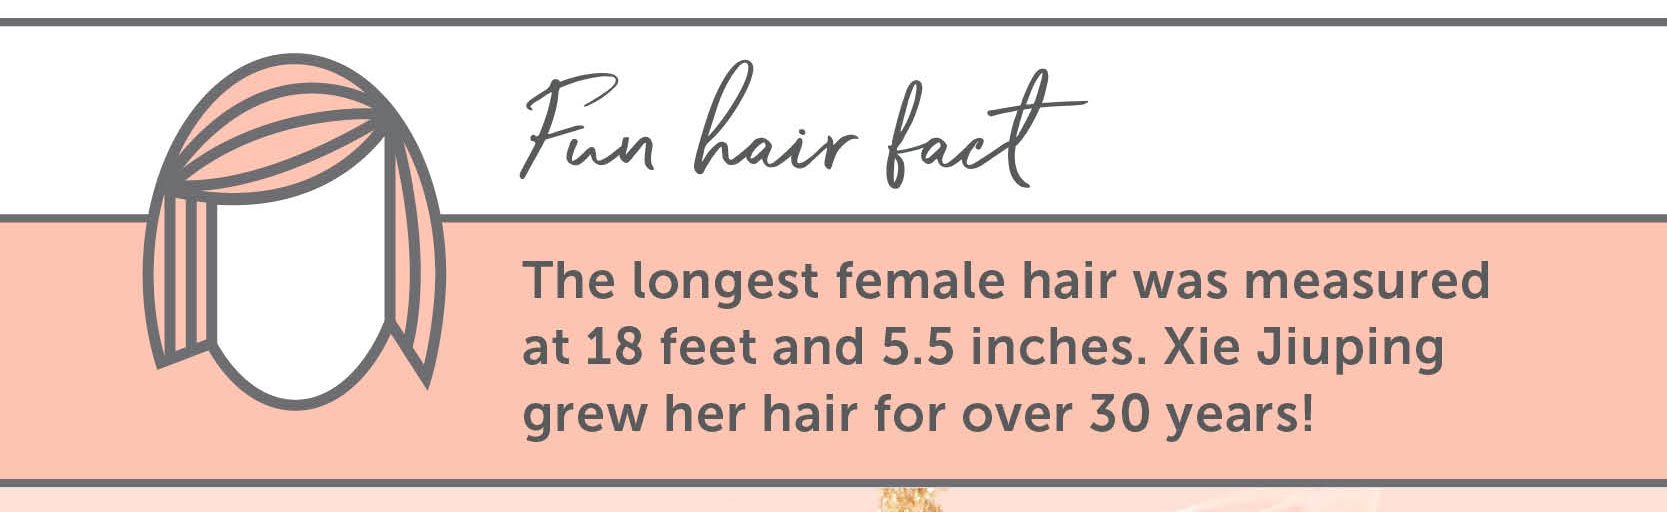 Hair Facts: The longest female hair was measured at 18 feet and 5.5 inches. Xie Jiuping grew her hair for over 30 years!